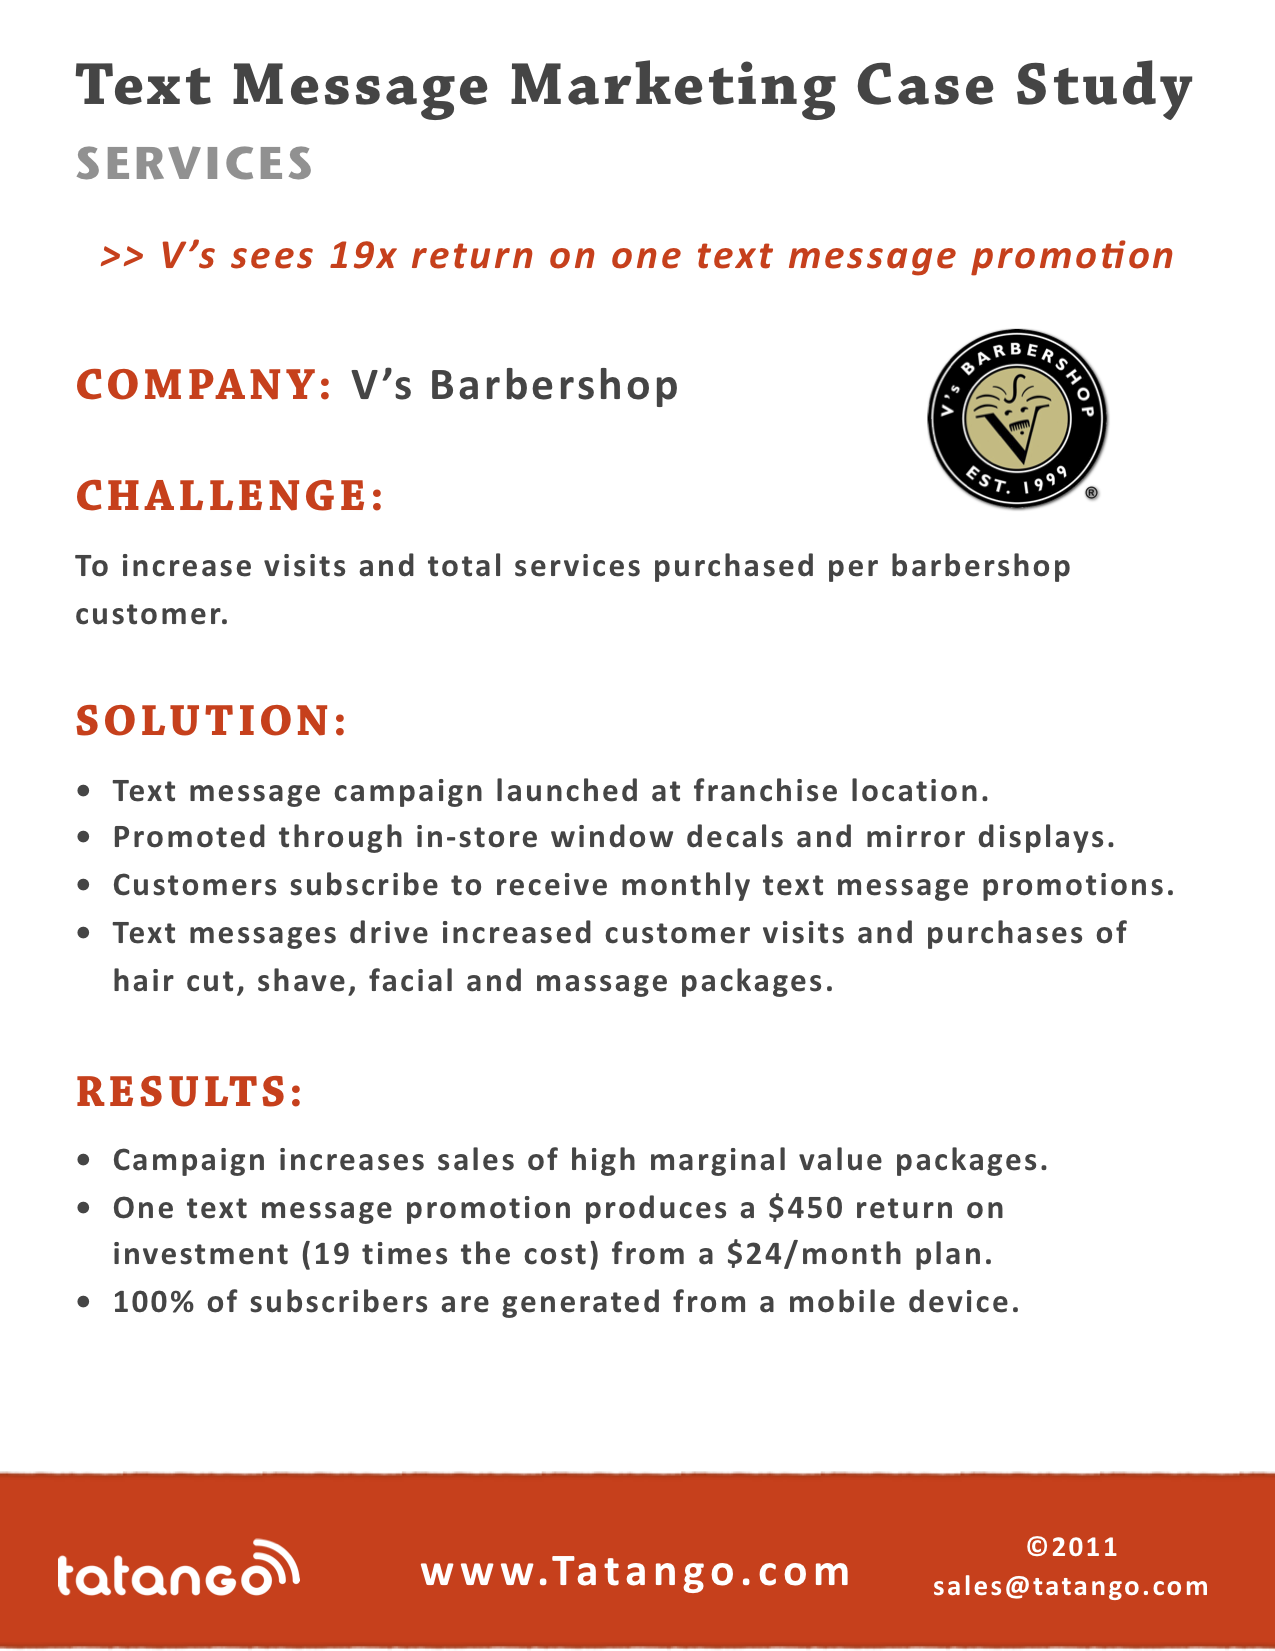 Learn how V's Barbershop used mobile marketing to increase revenue